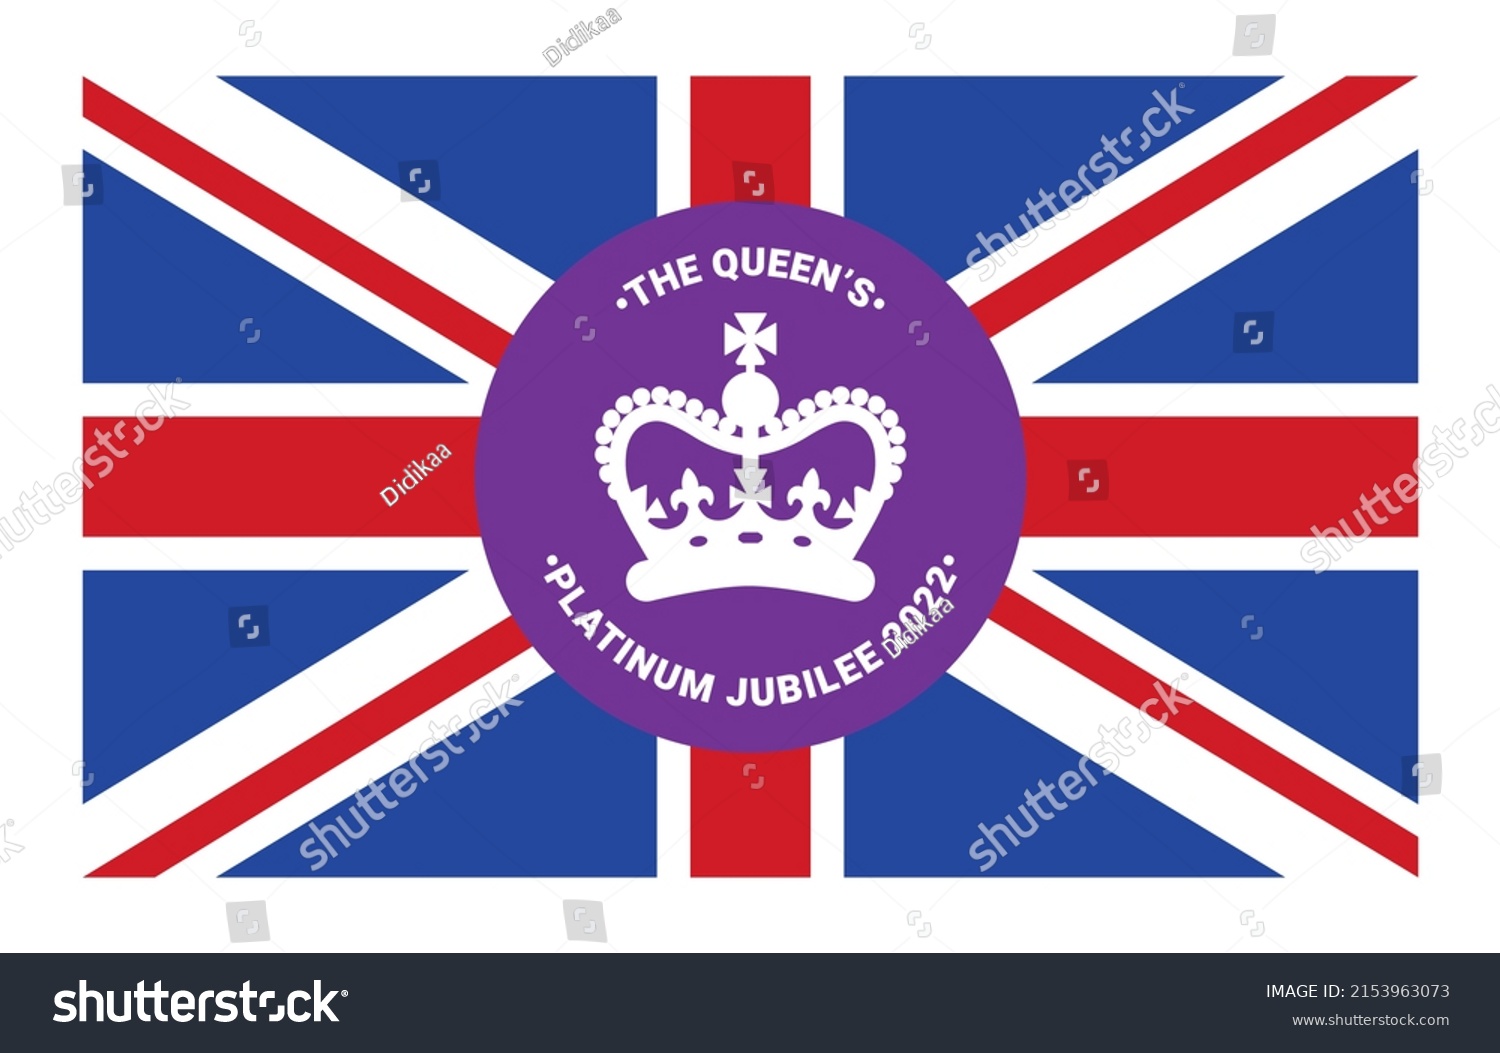 SVG of The Queen's Platinum Jubilee celebration with the Union Jack on background. 2022. The Queen will become the first British Monarch to celebrate a Platinum Jubilee after 70 years of service.  svg